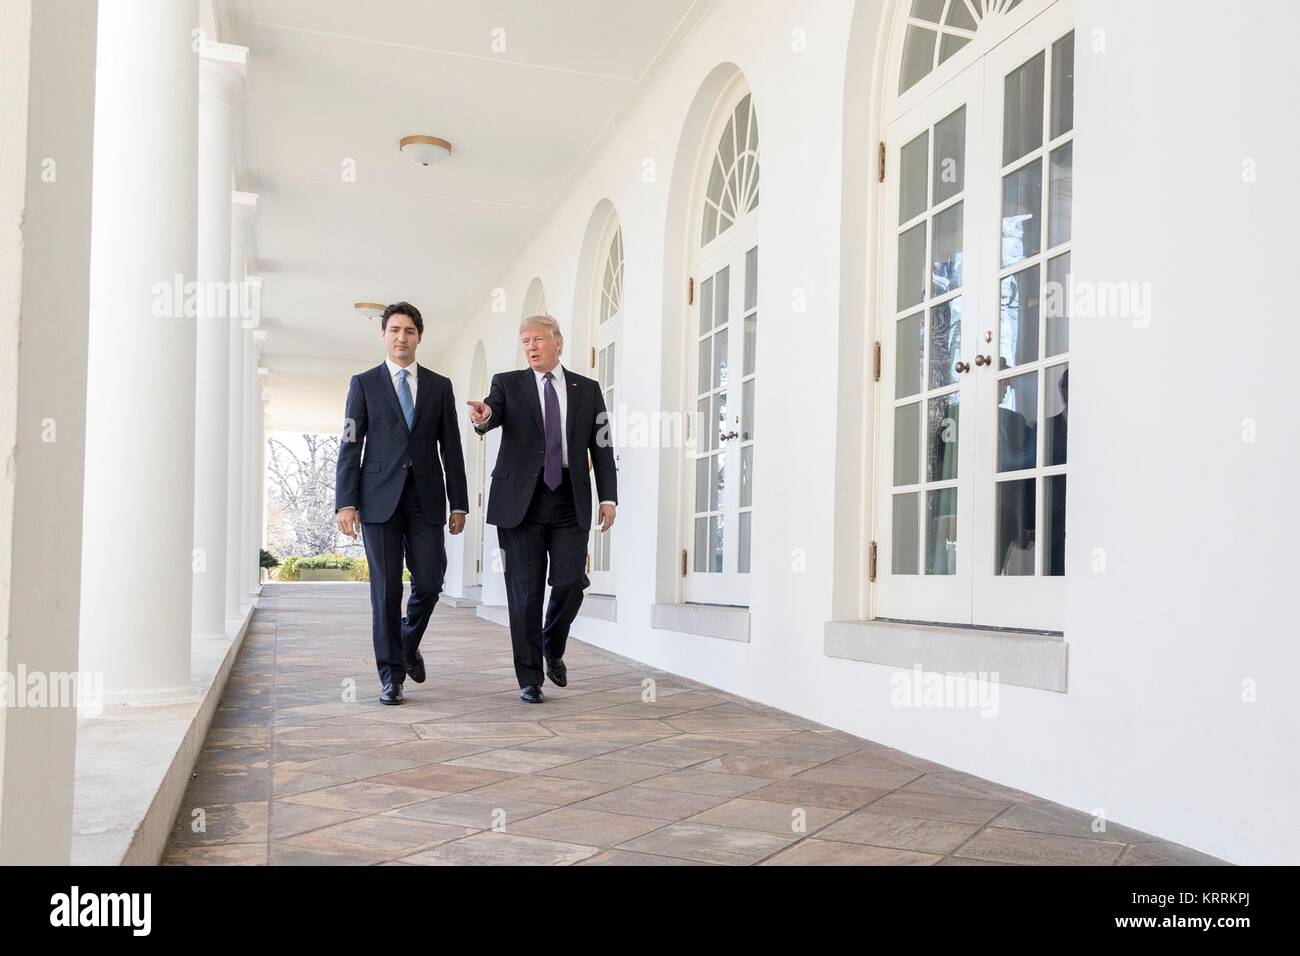 Canadian Prime Minister Justin Trudeau (left) and U.S. President Donald Trump walk along the White House Colonnade February 13, 2017 in Washington, DC. Stock Photo